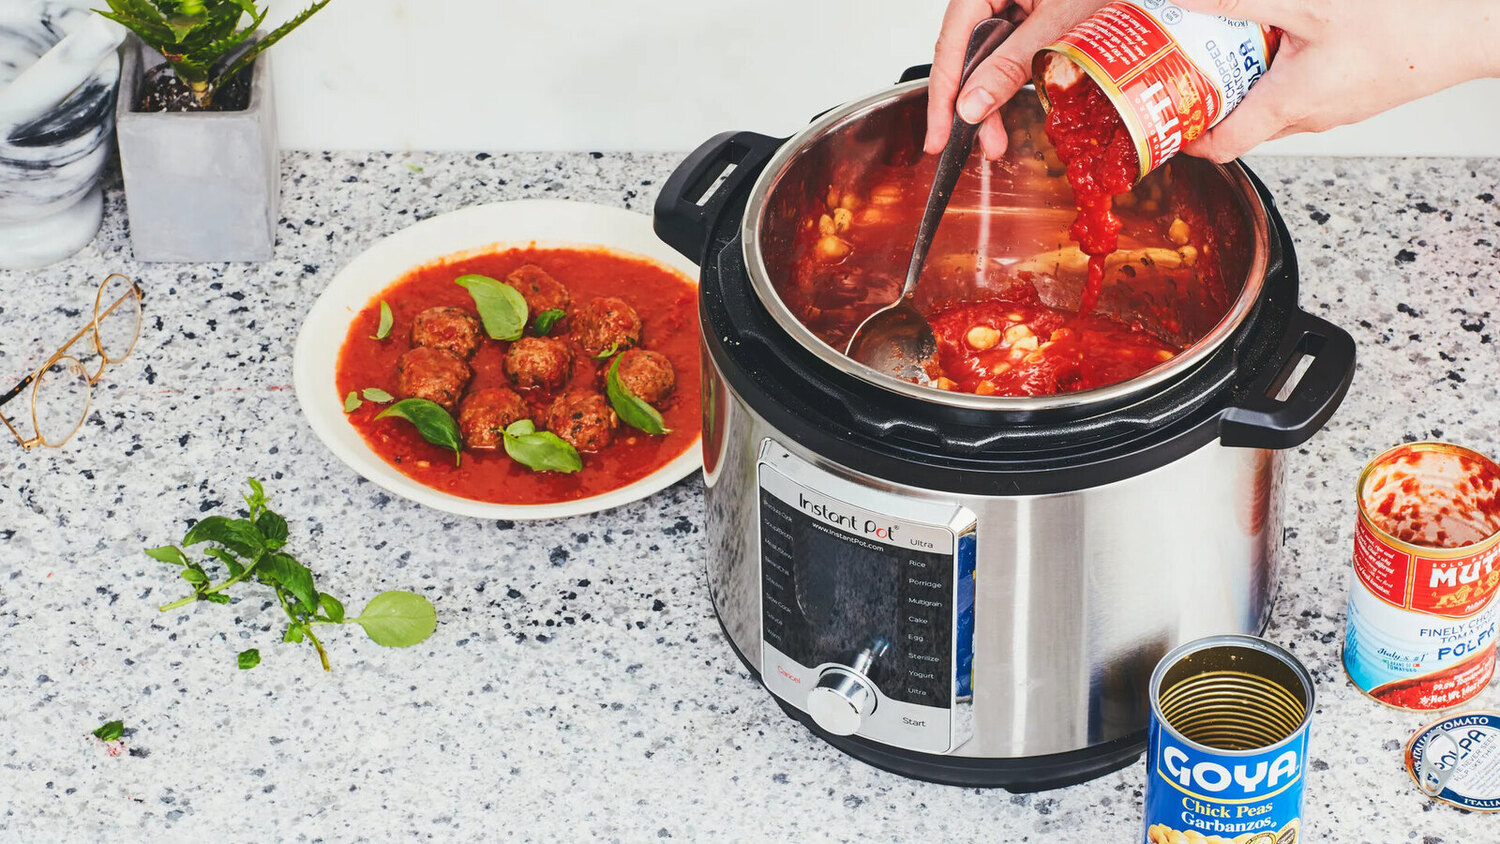 How Do You Cook In An Electric Pressure Cooker?